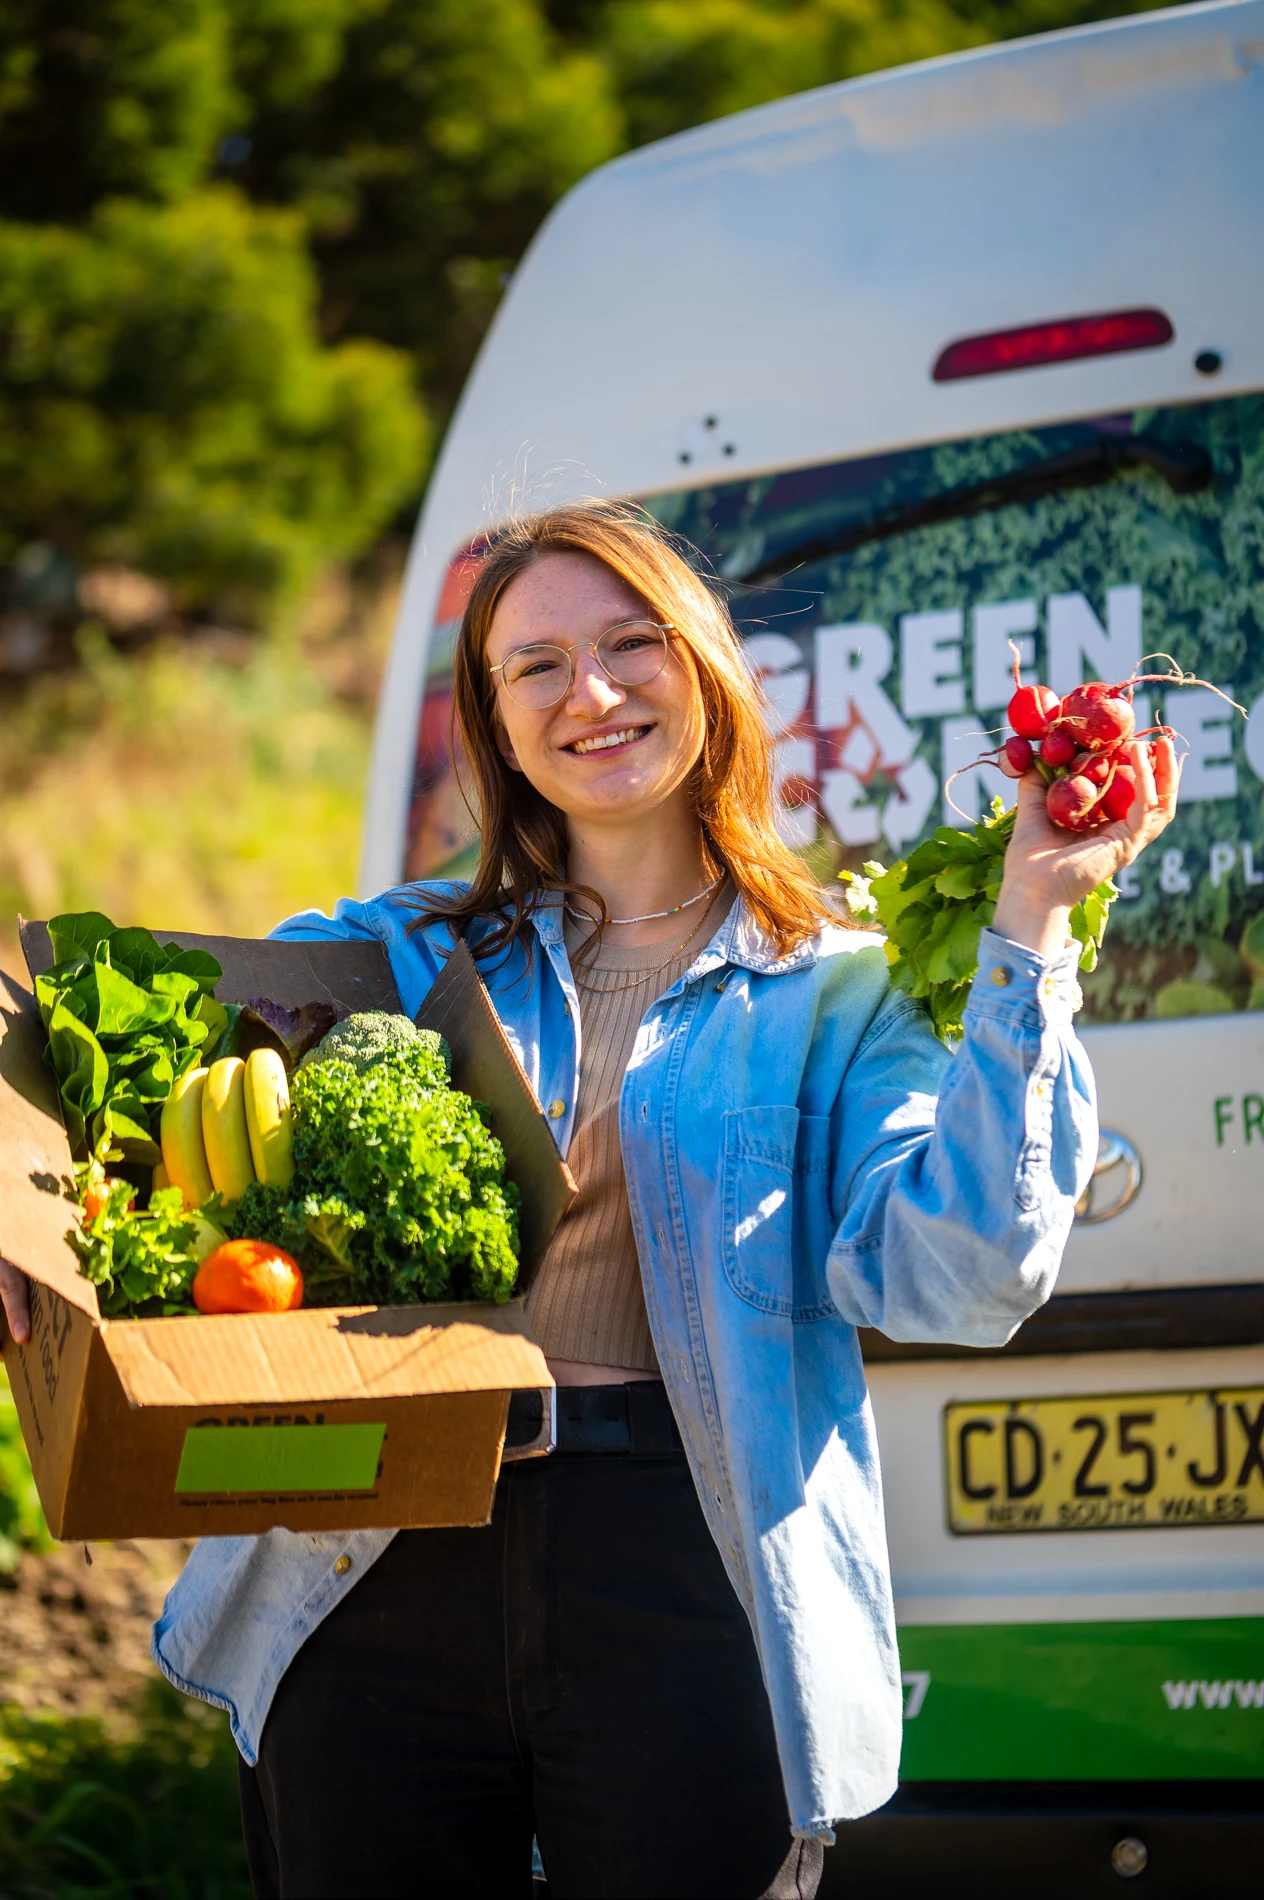 Post Green Connect Girl Holding Fruit Box In Front Of Van